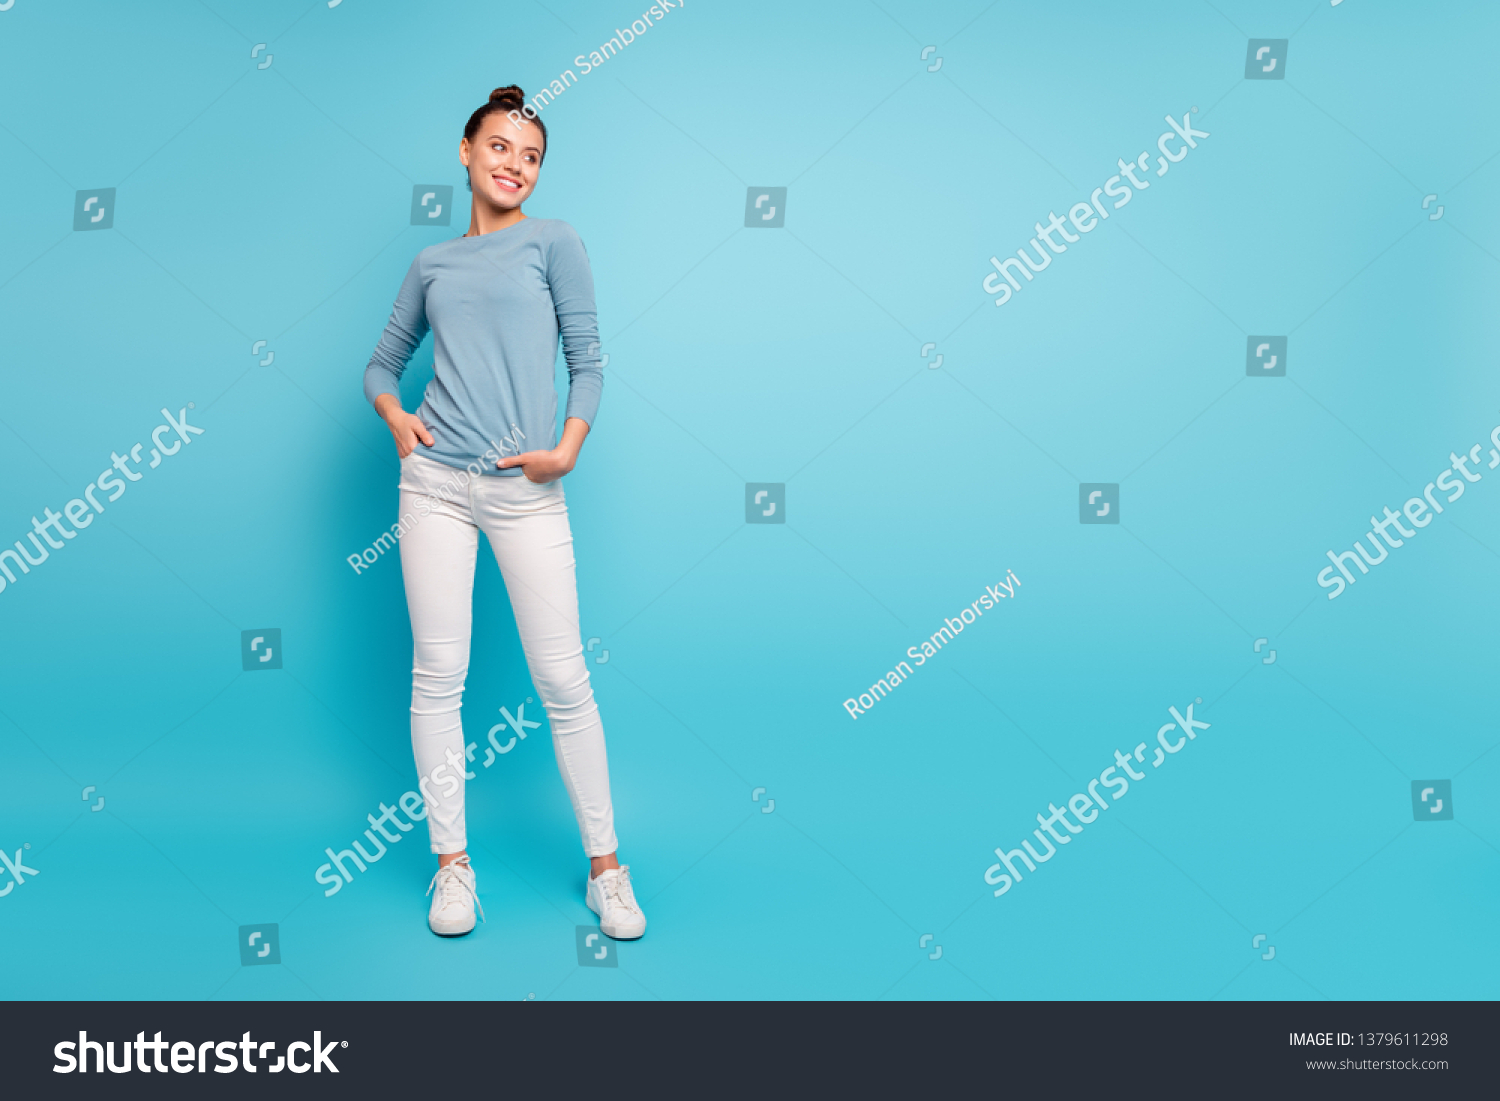 6,671 Full length body size photo Images, Stock Photos & Vectors ...